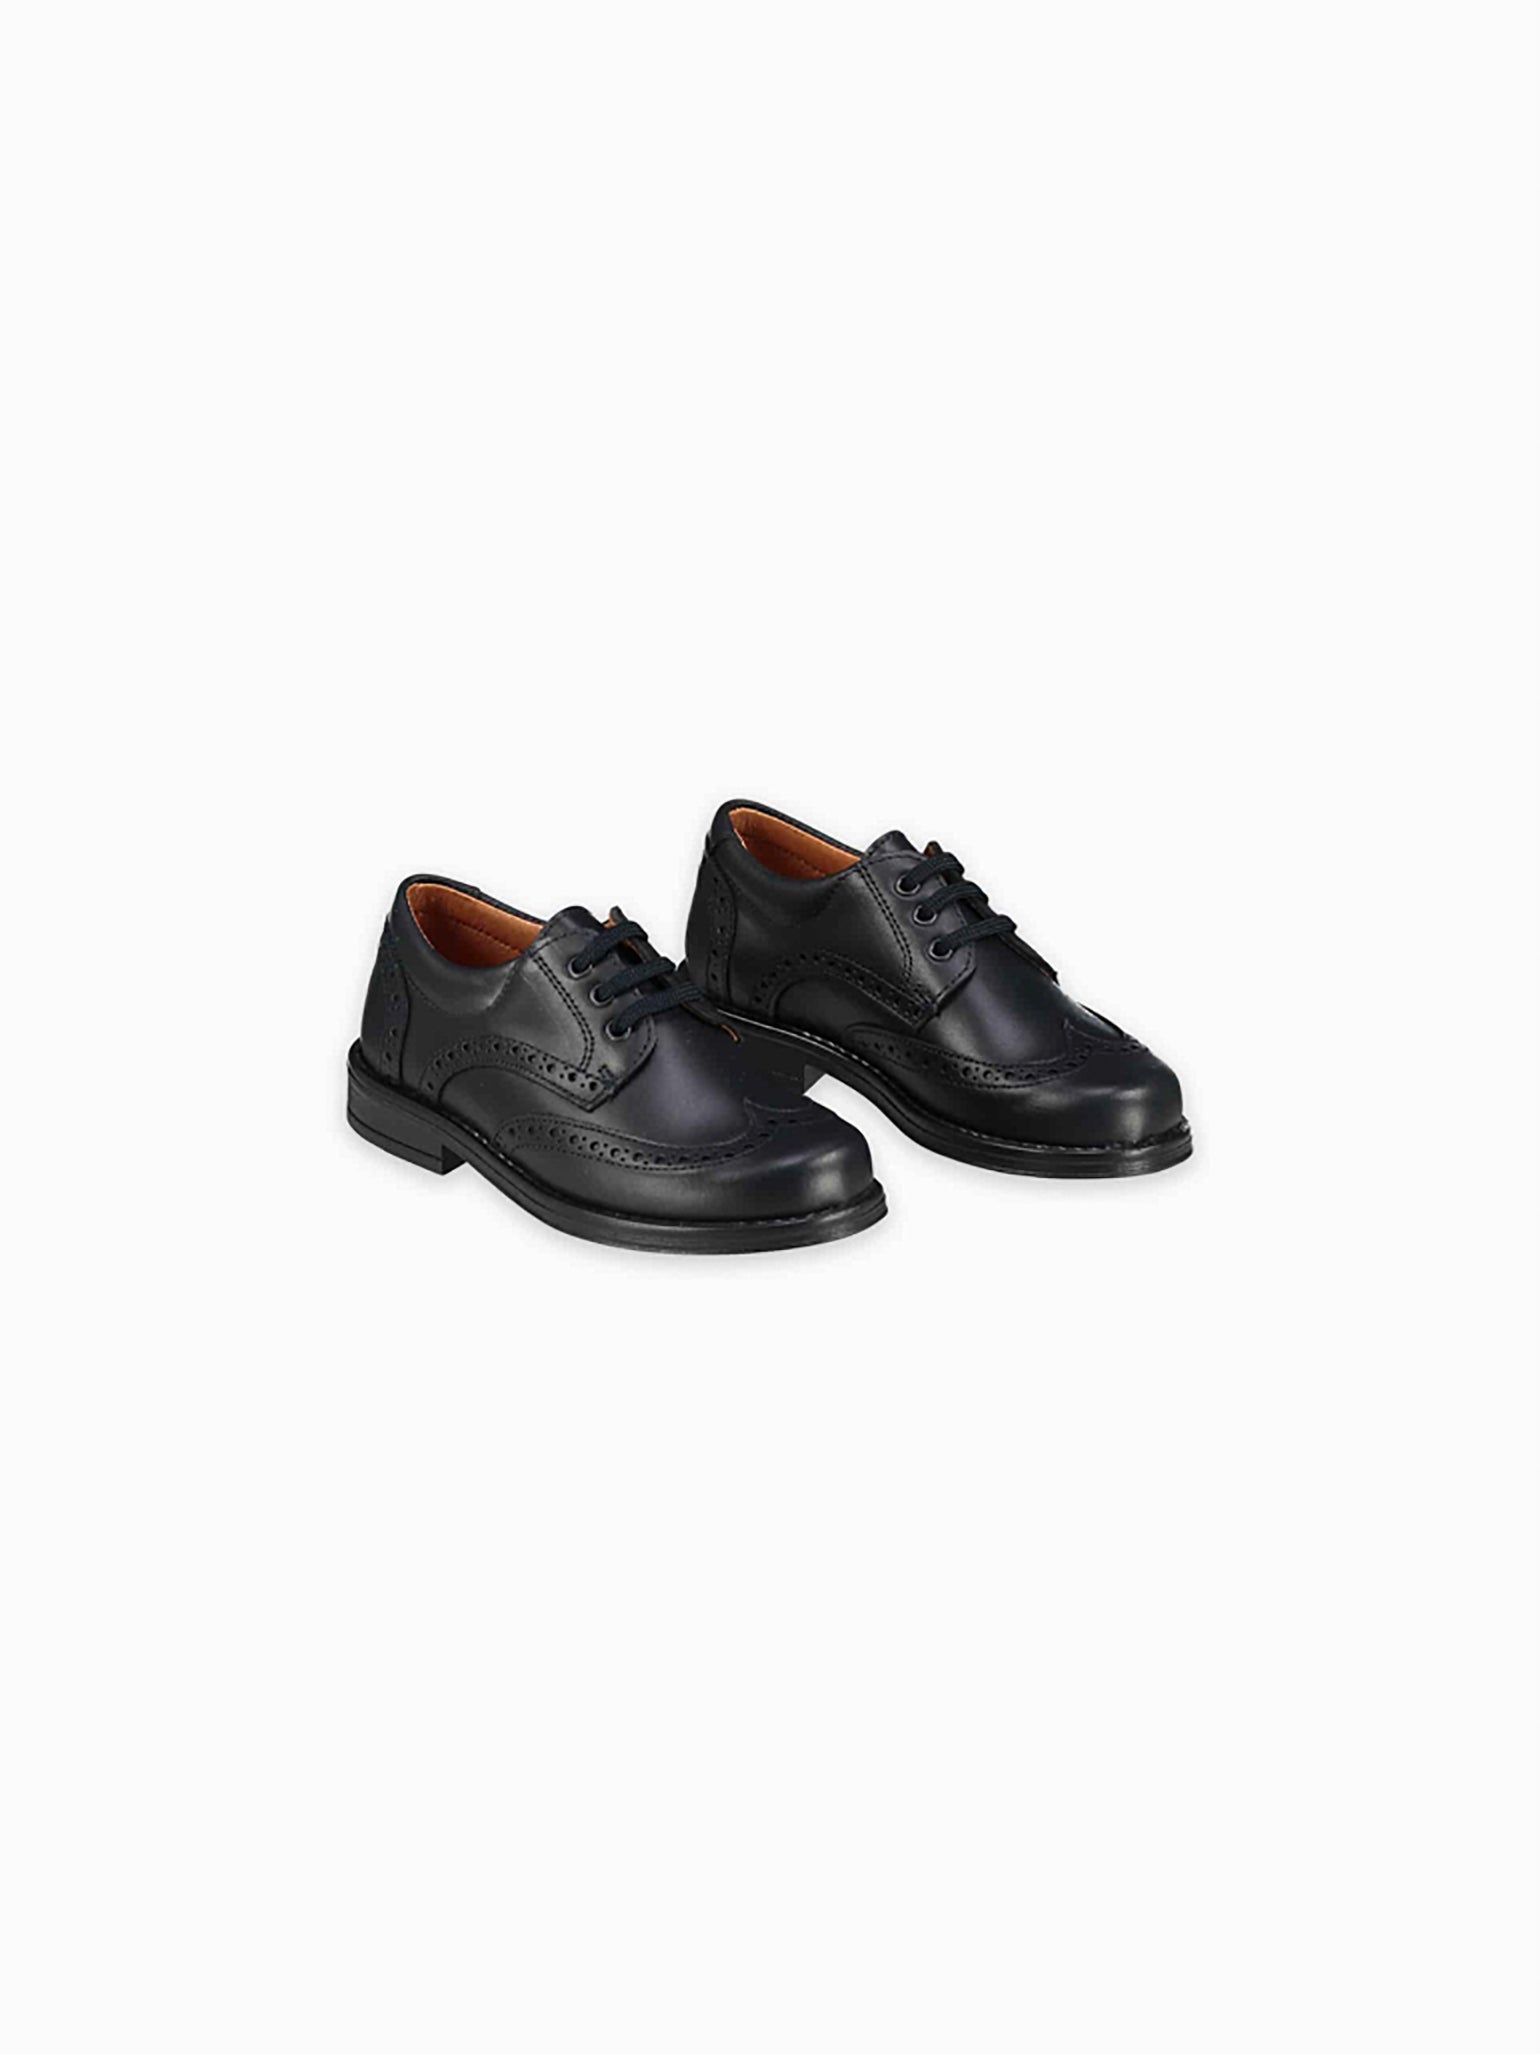 Black Leather Lace Up School Shoes